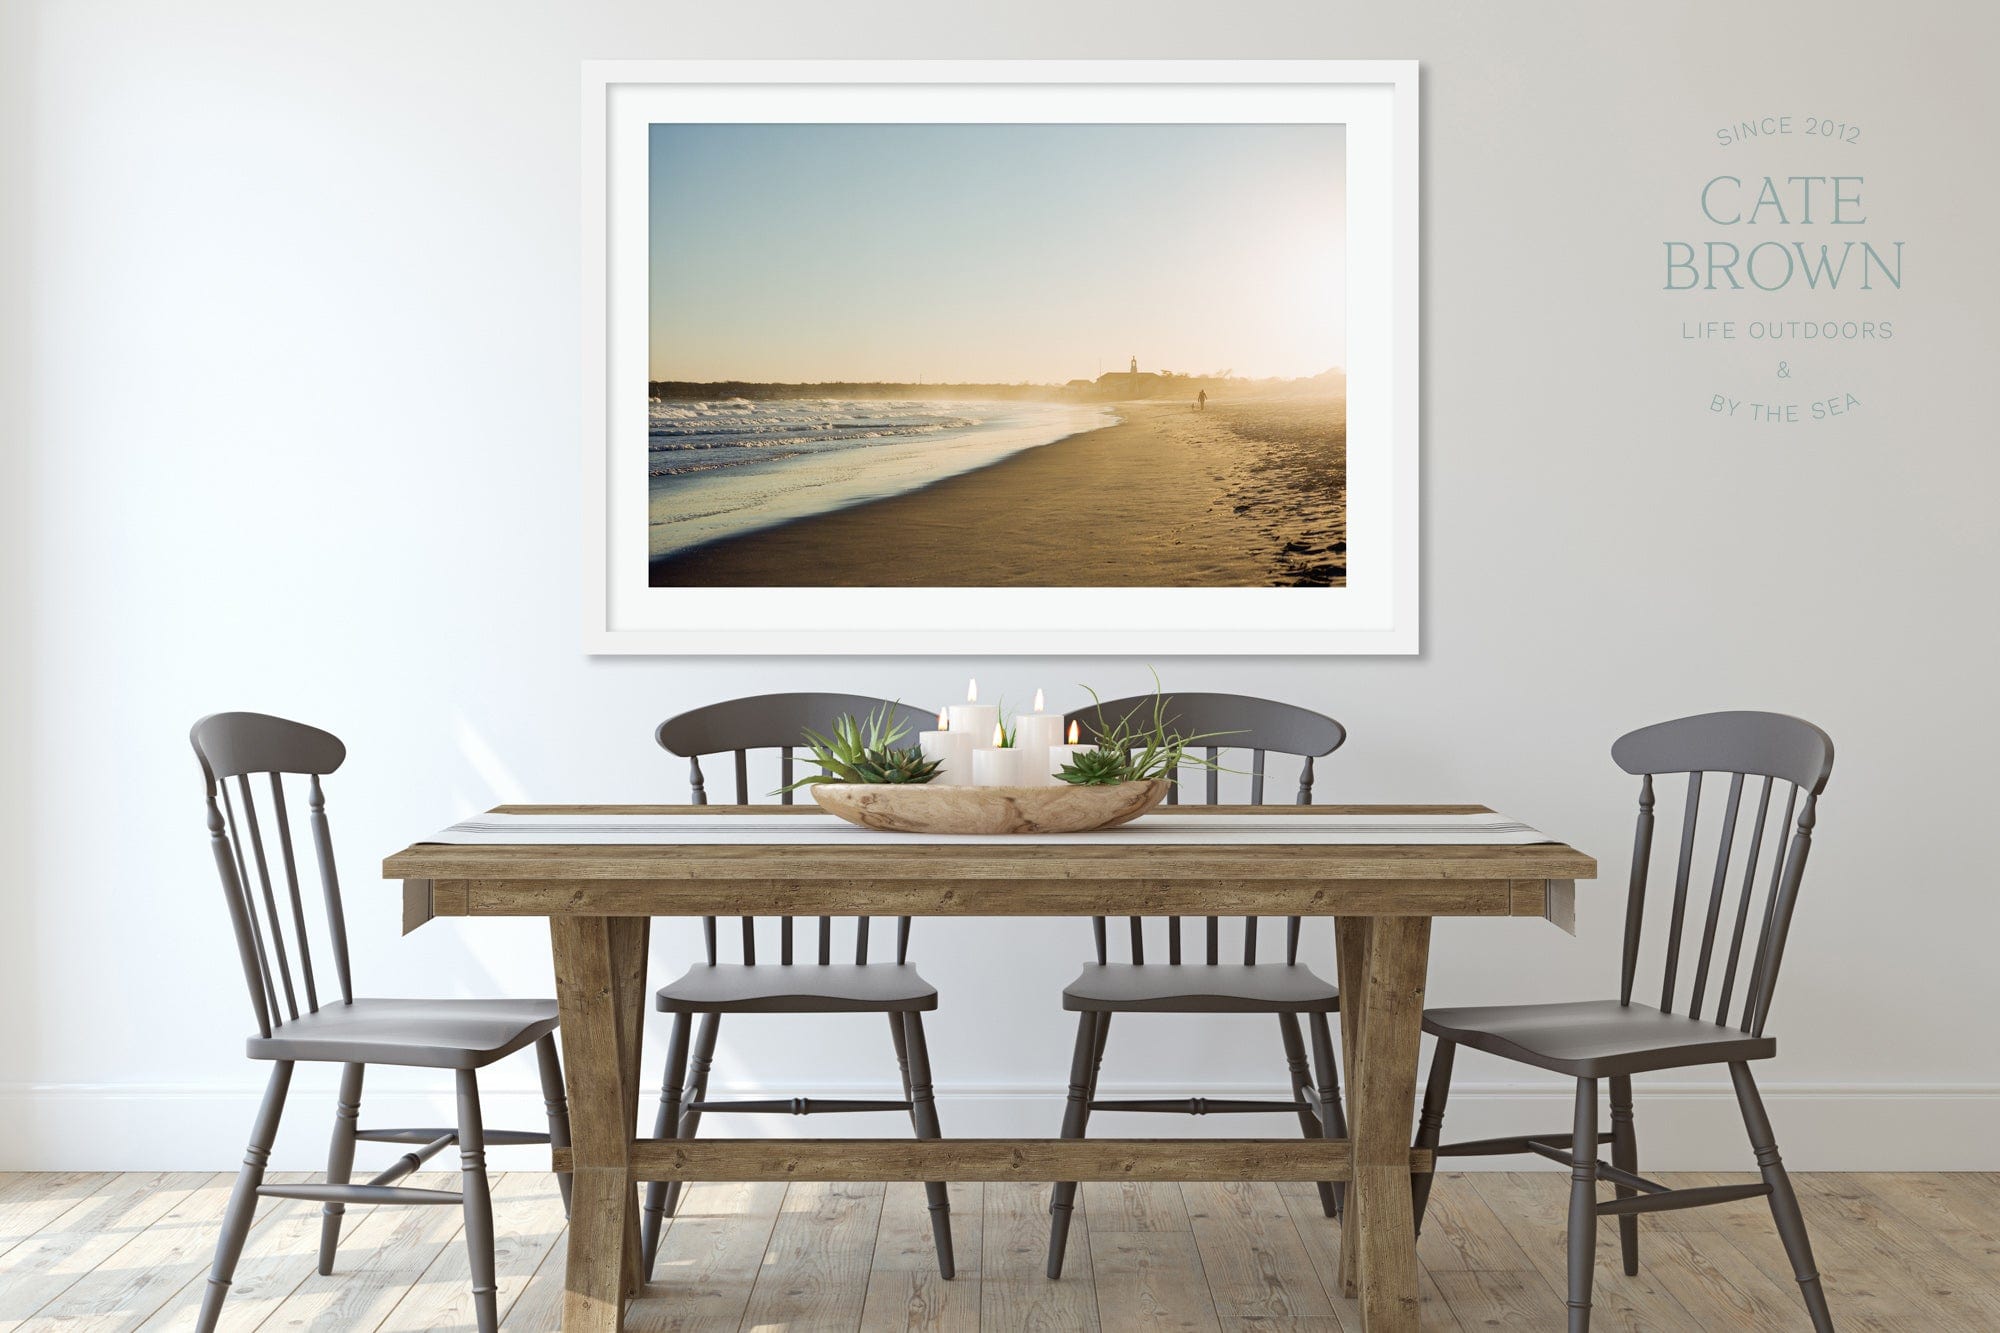 Cate Brown Photo Fine Art Print / 8"x12" / None (Print Only) Narragansett #1  //  Film Photography Made to Order Ocean Fine Art